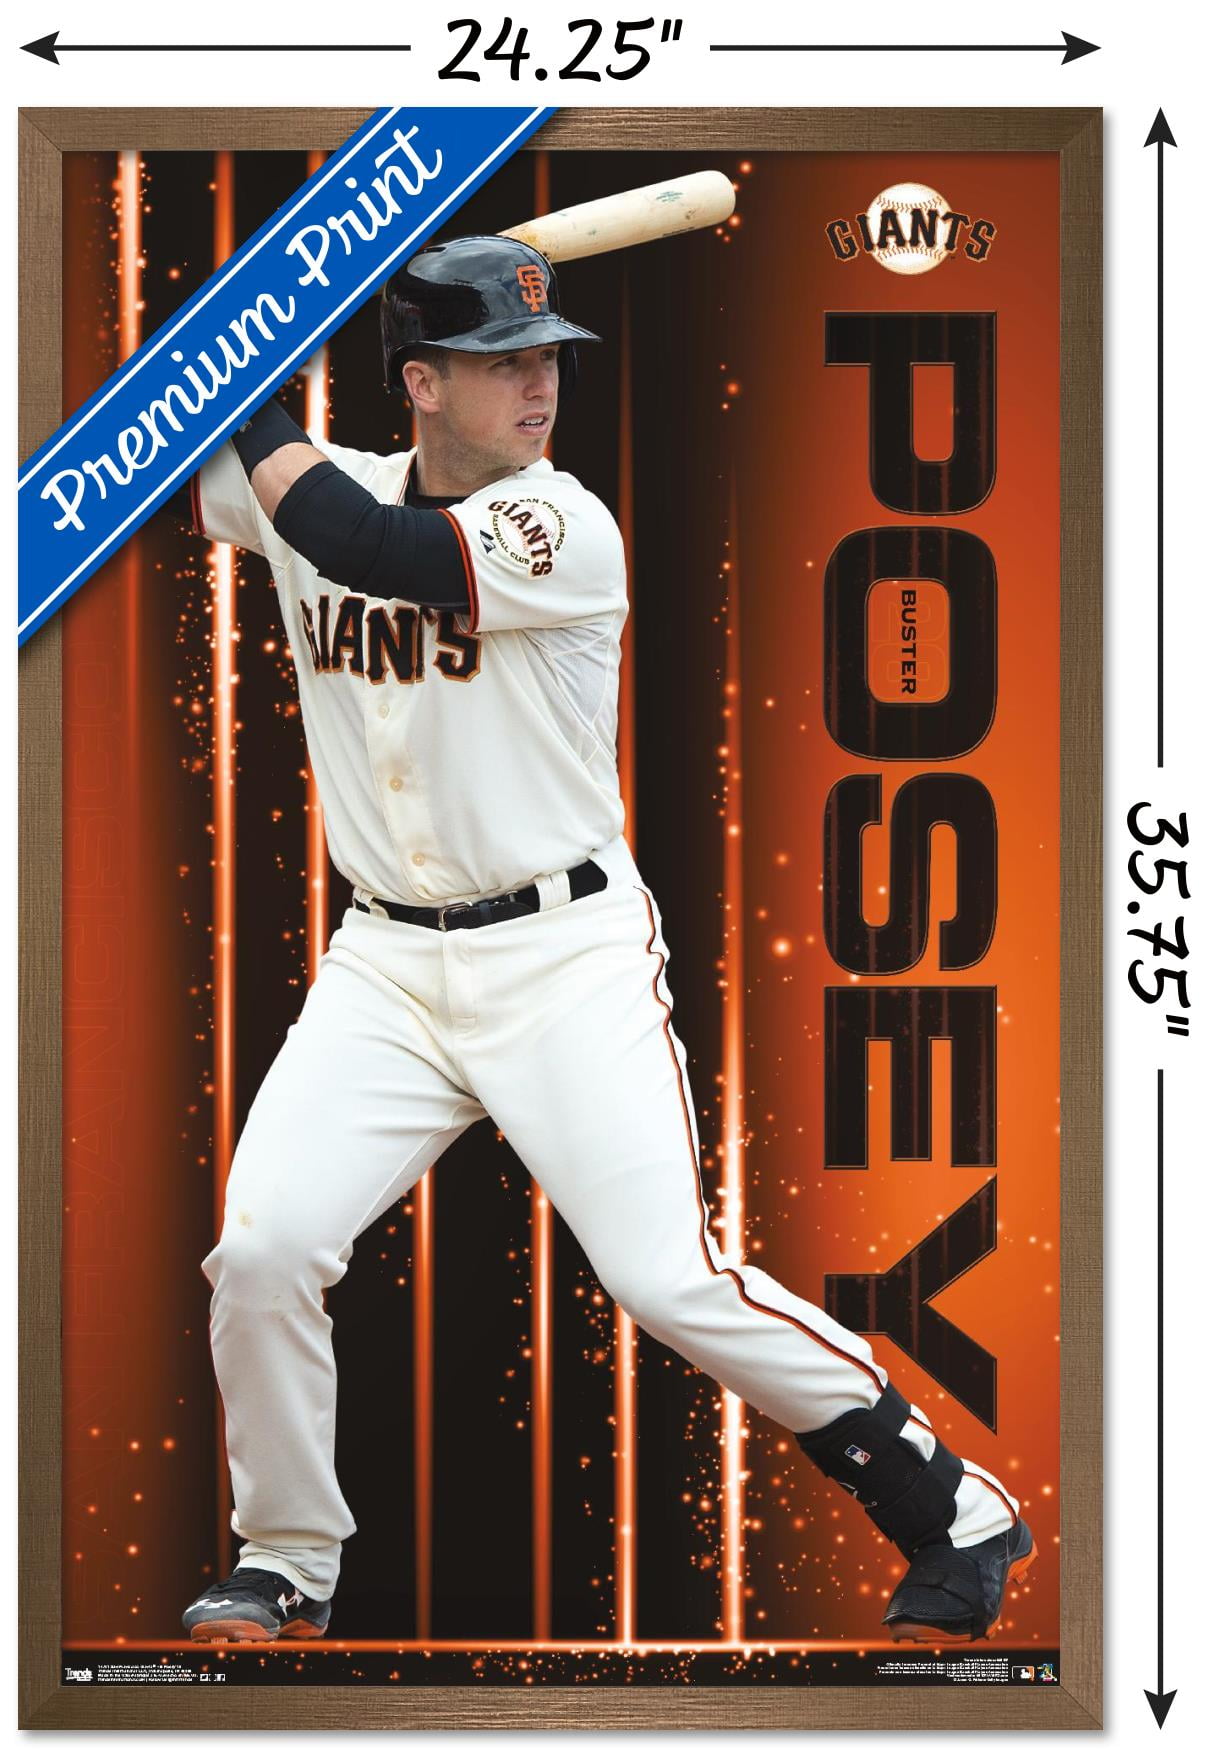 San Francisco Giants All Star BUSTER POSEY Poster Photo Painting CANVAS Wall Art 